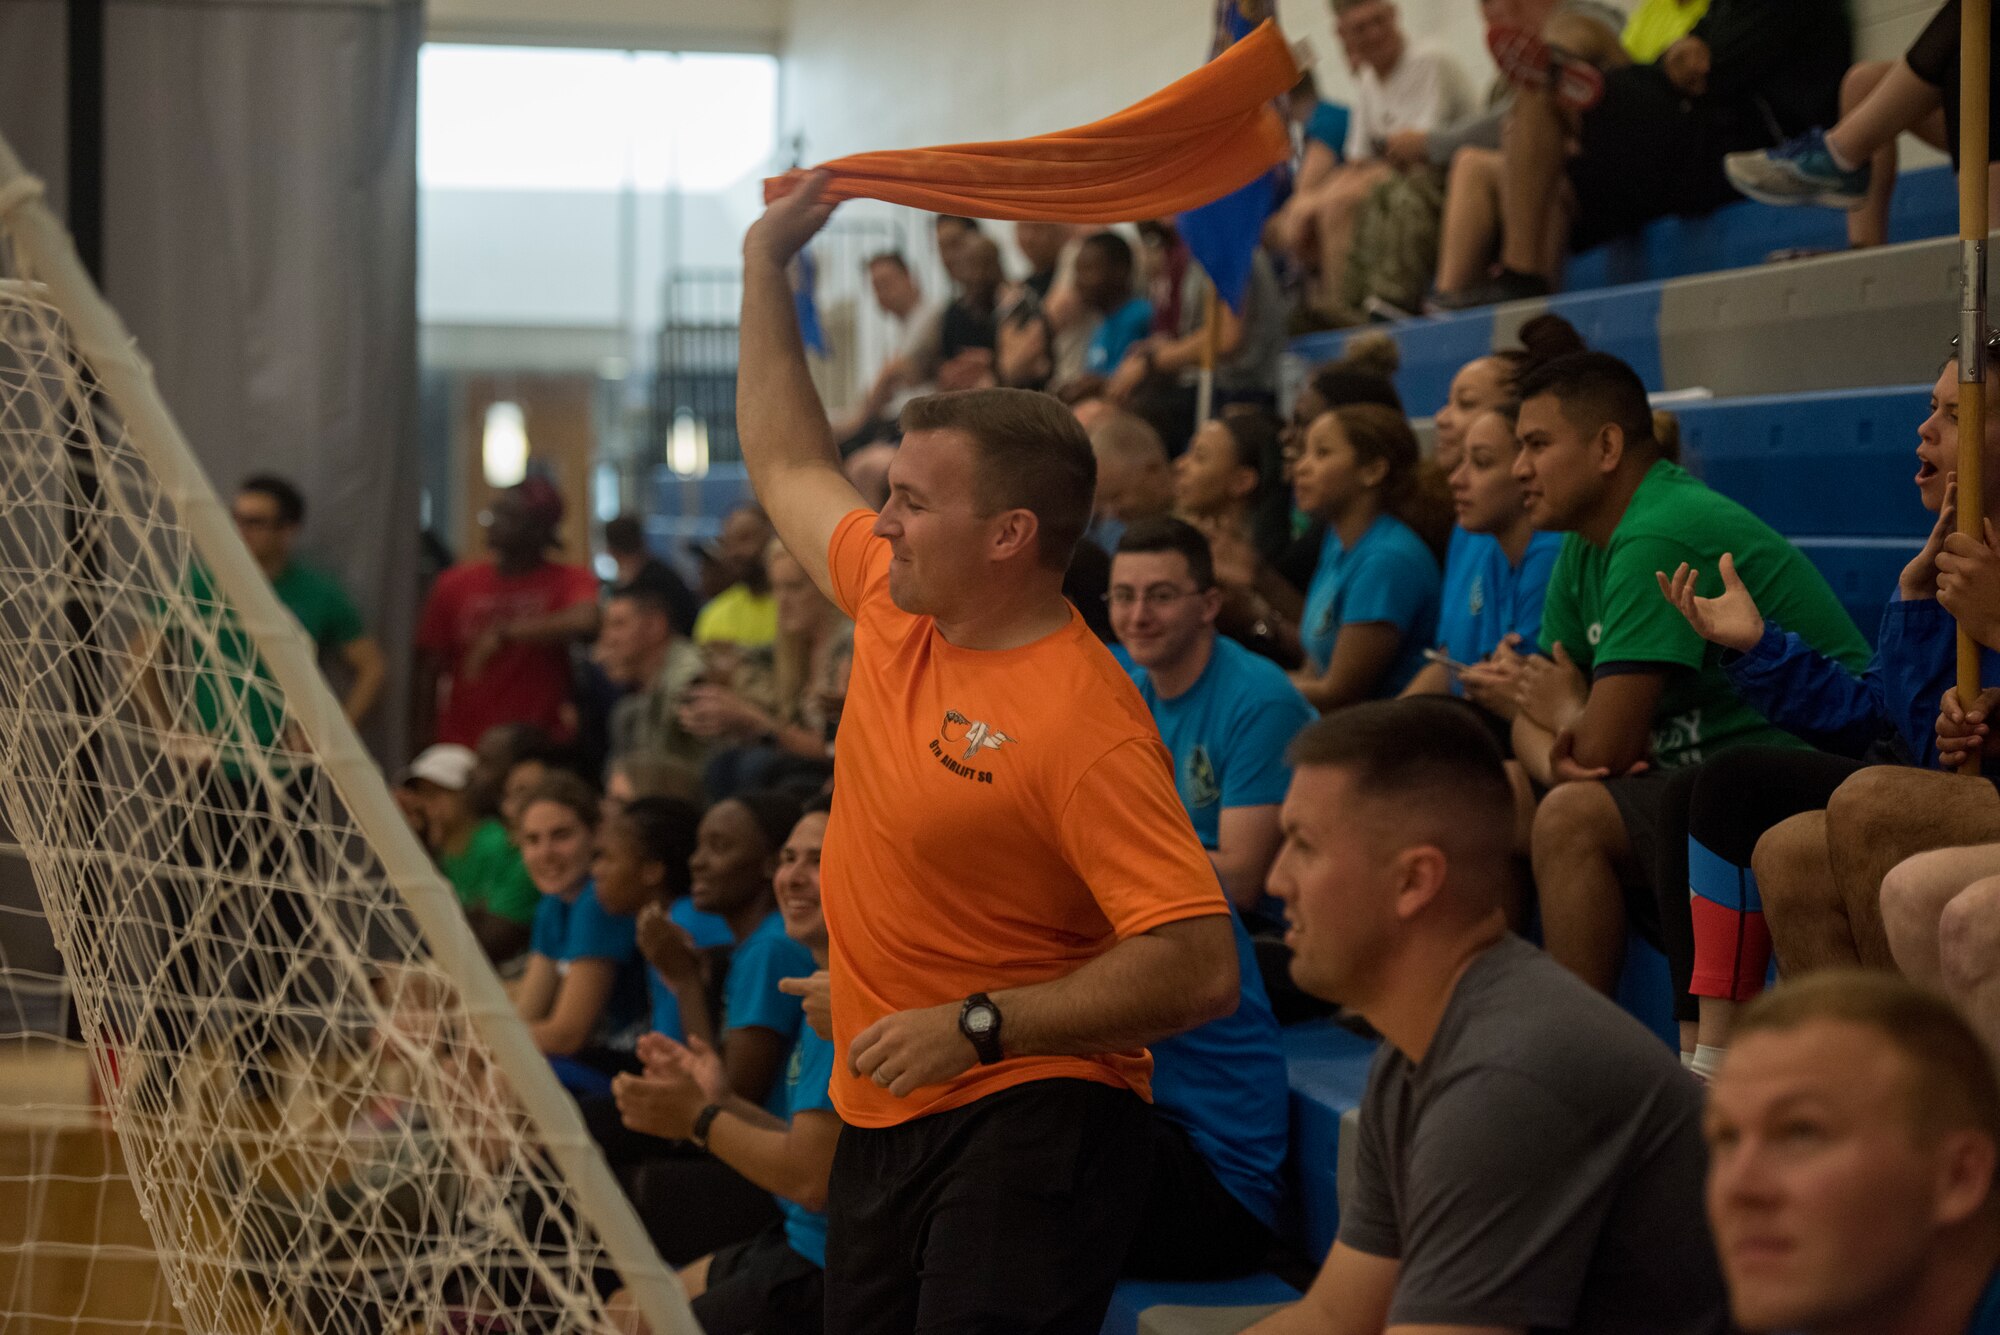 An Airman from the 9th Airlift Squadron swings a towel during the broomball event June 14, 2019 at Dover Air Force Base, Del. All military and civilian members associated with a squadron were able to participate in Sports Day. (U.S. Air Force photo by A1C Jonathan Harding)